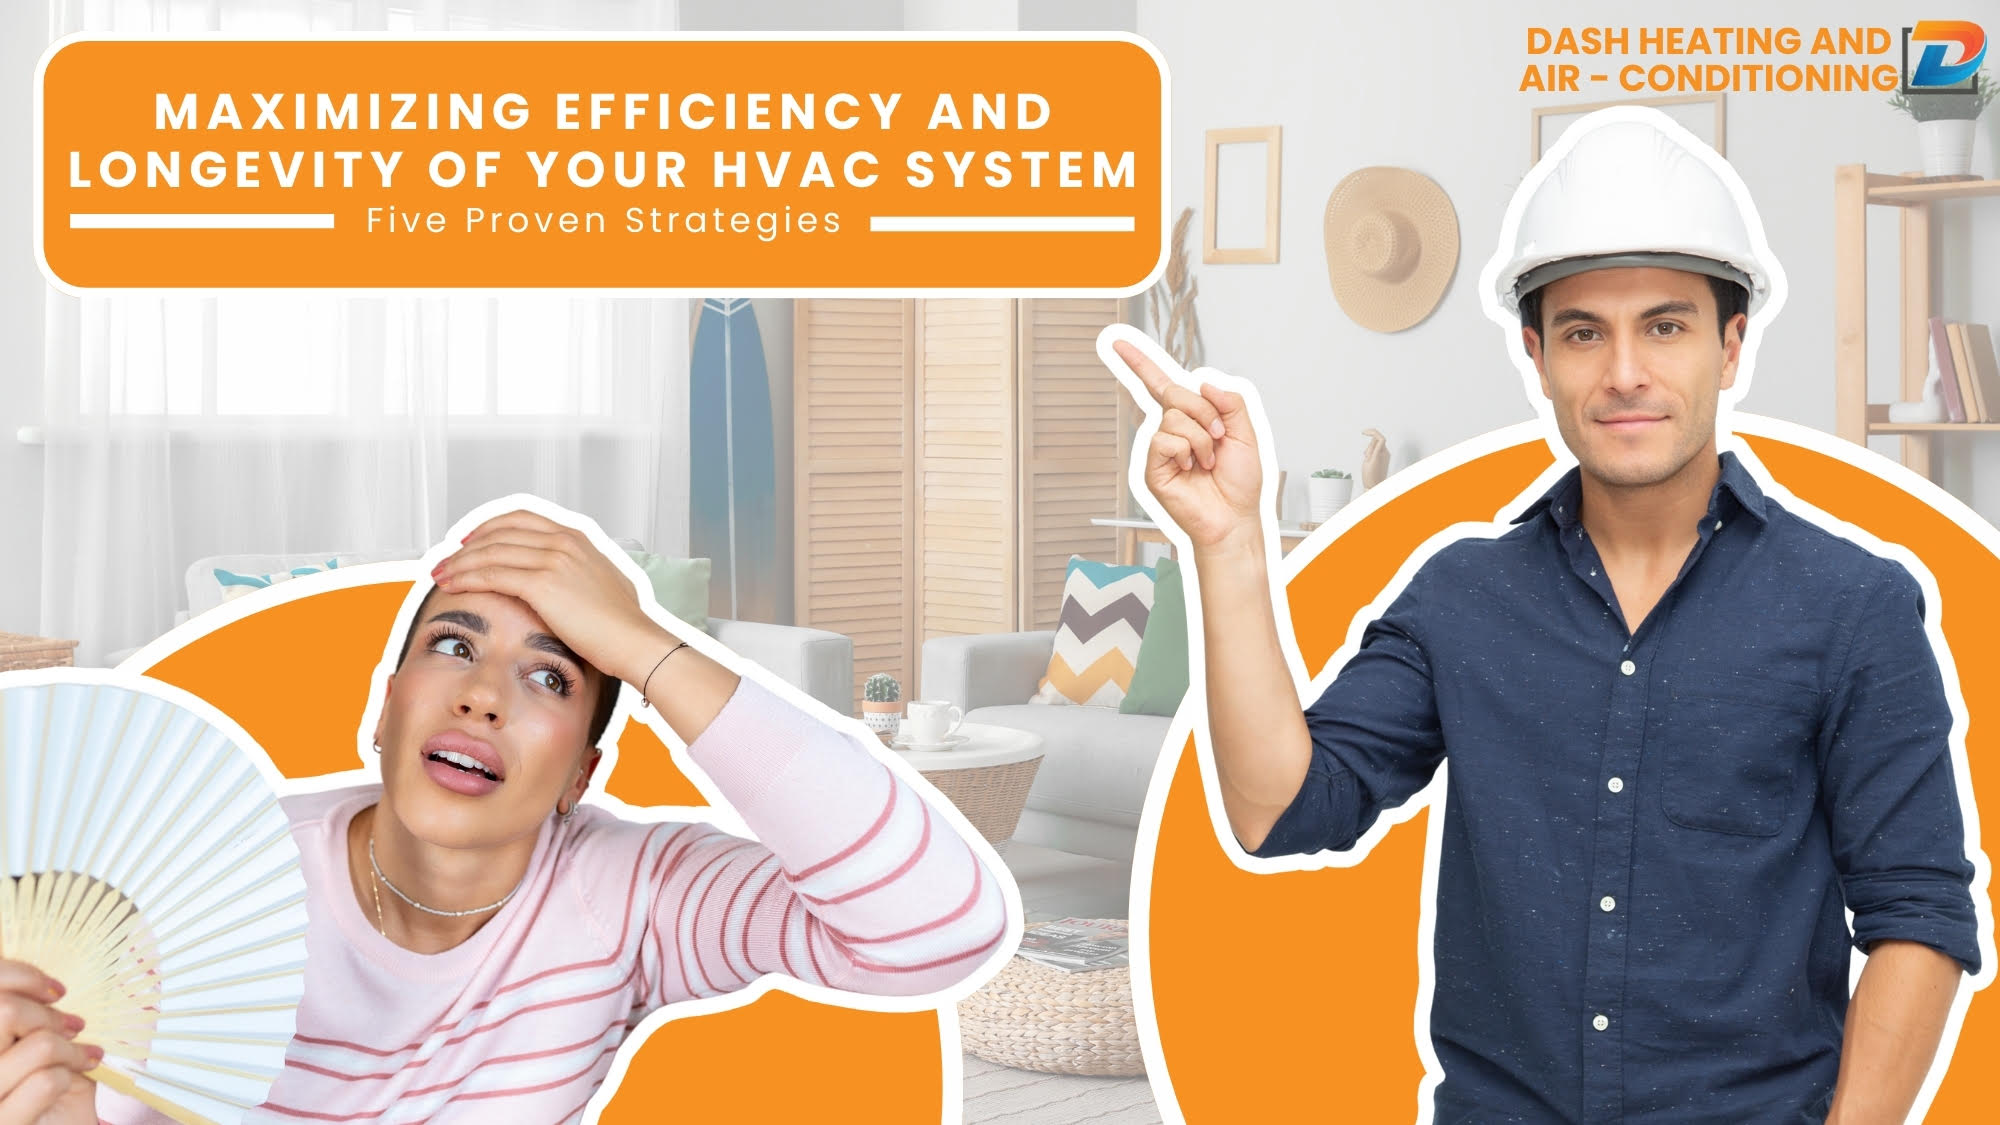 Maximizing Efficiency and Longevity of Your HVAC System: Five Proven Strategies